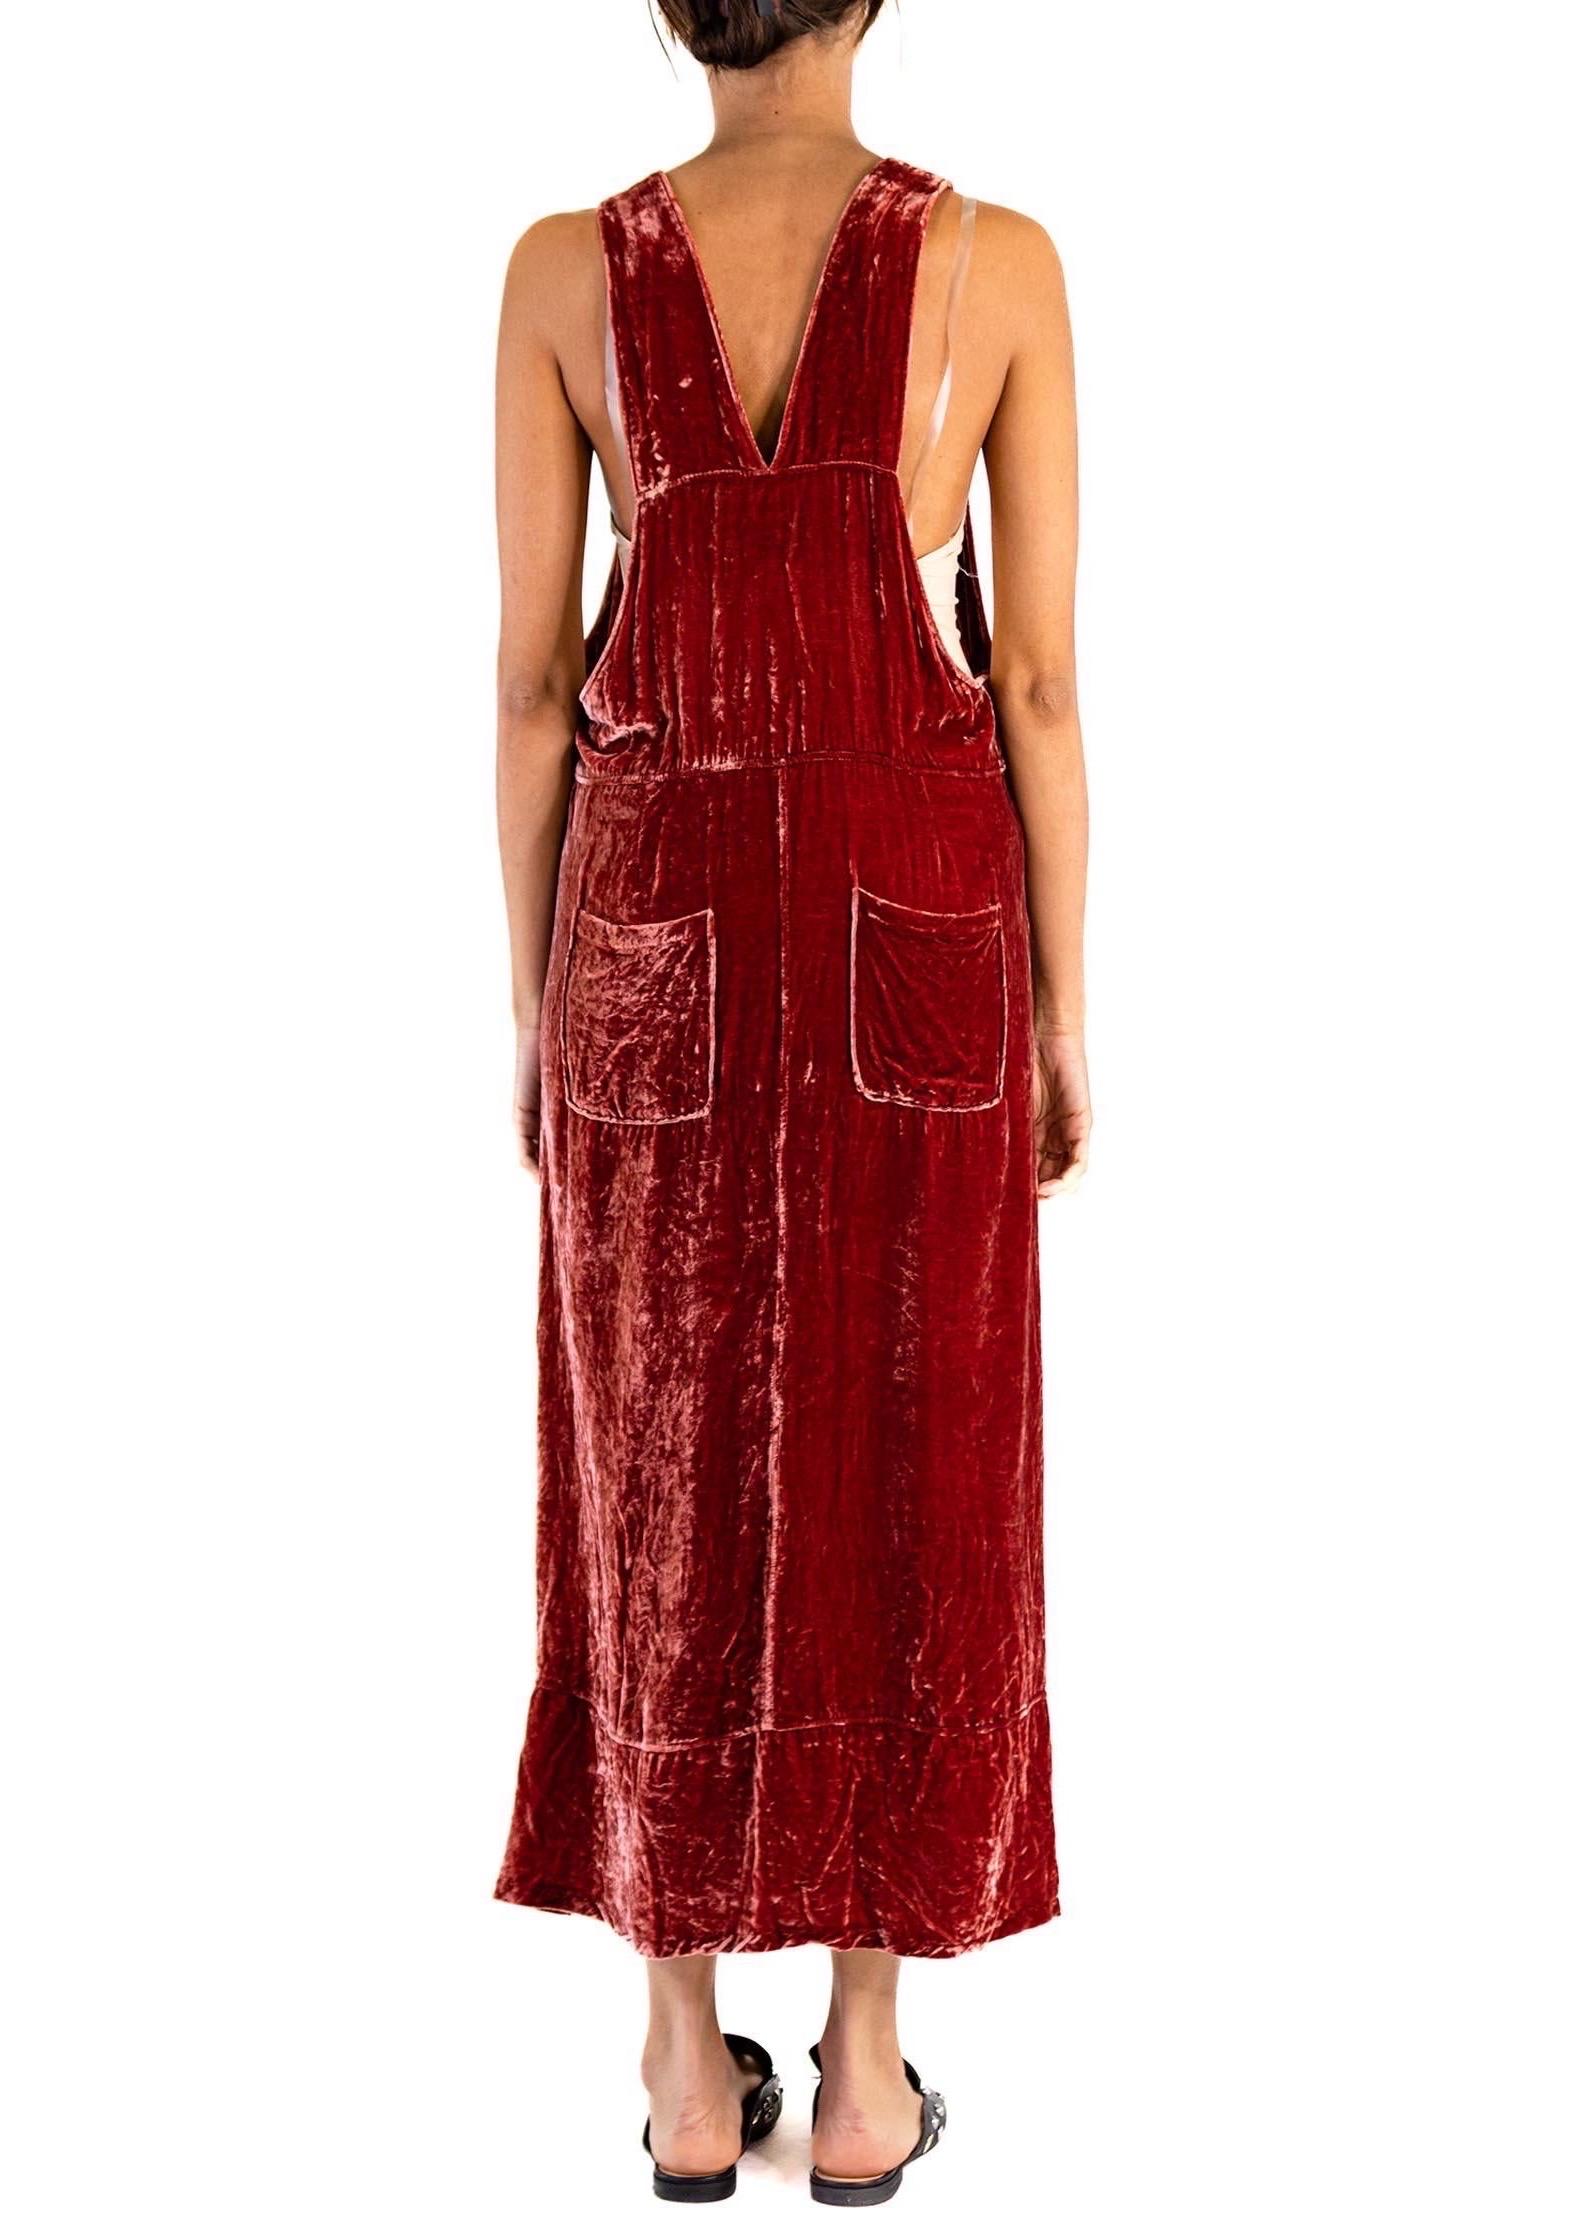 1990S Dusty Rose Silk & Rayon Crushed Velvet Overalls Style Dress With Large Bu For Sale 4